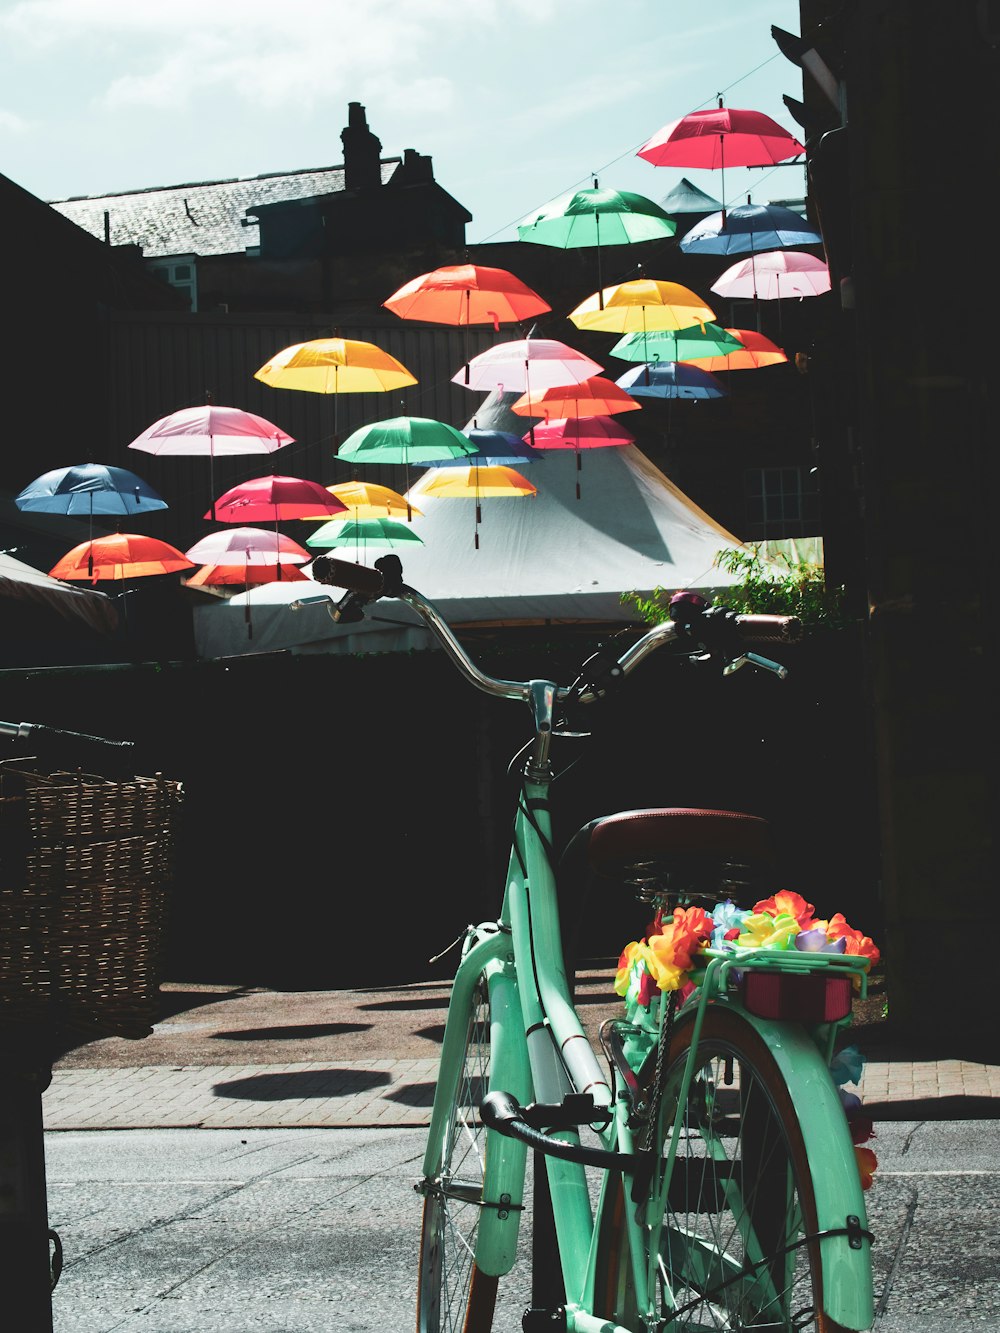 green bicycle with umbrella near umbrella during daytime